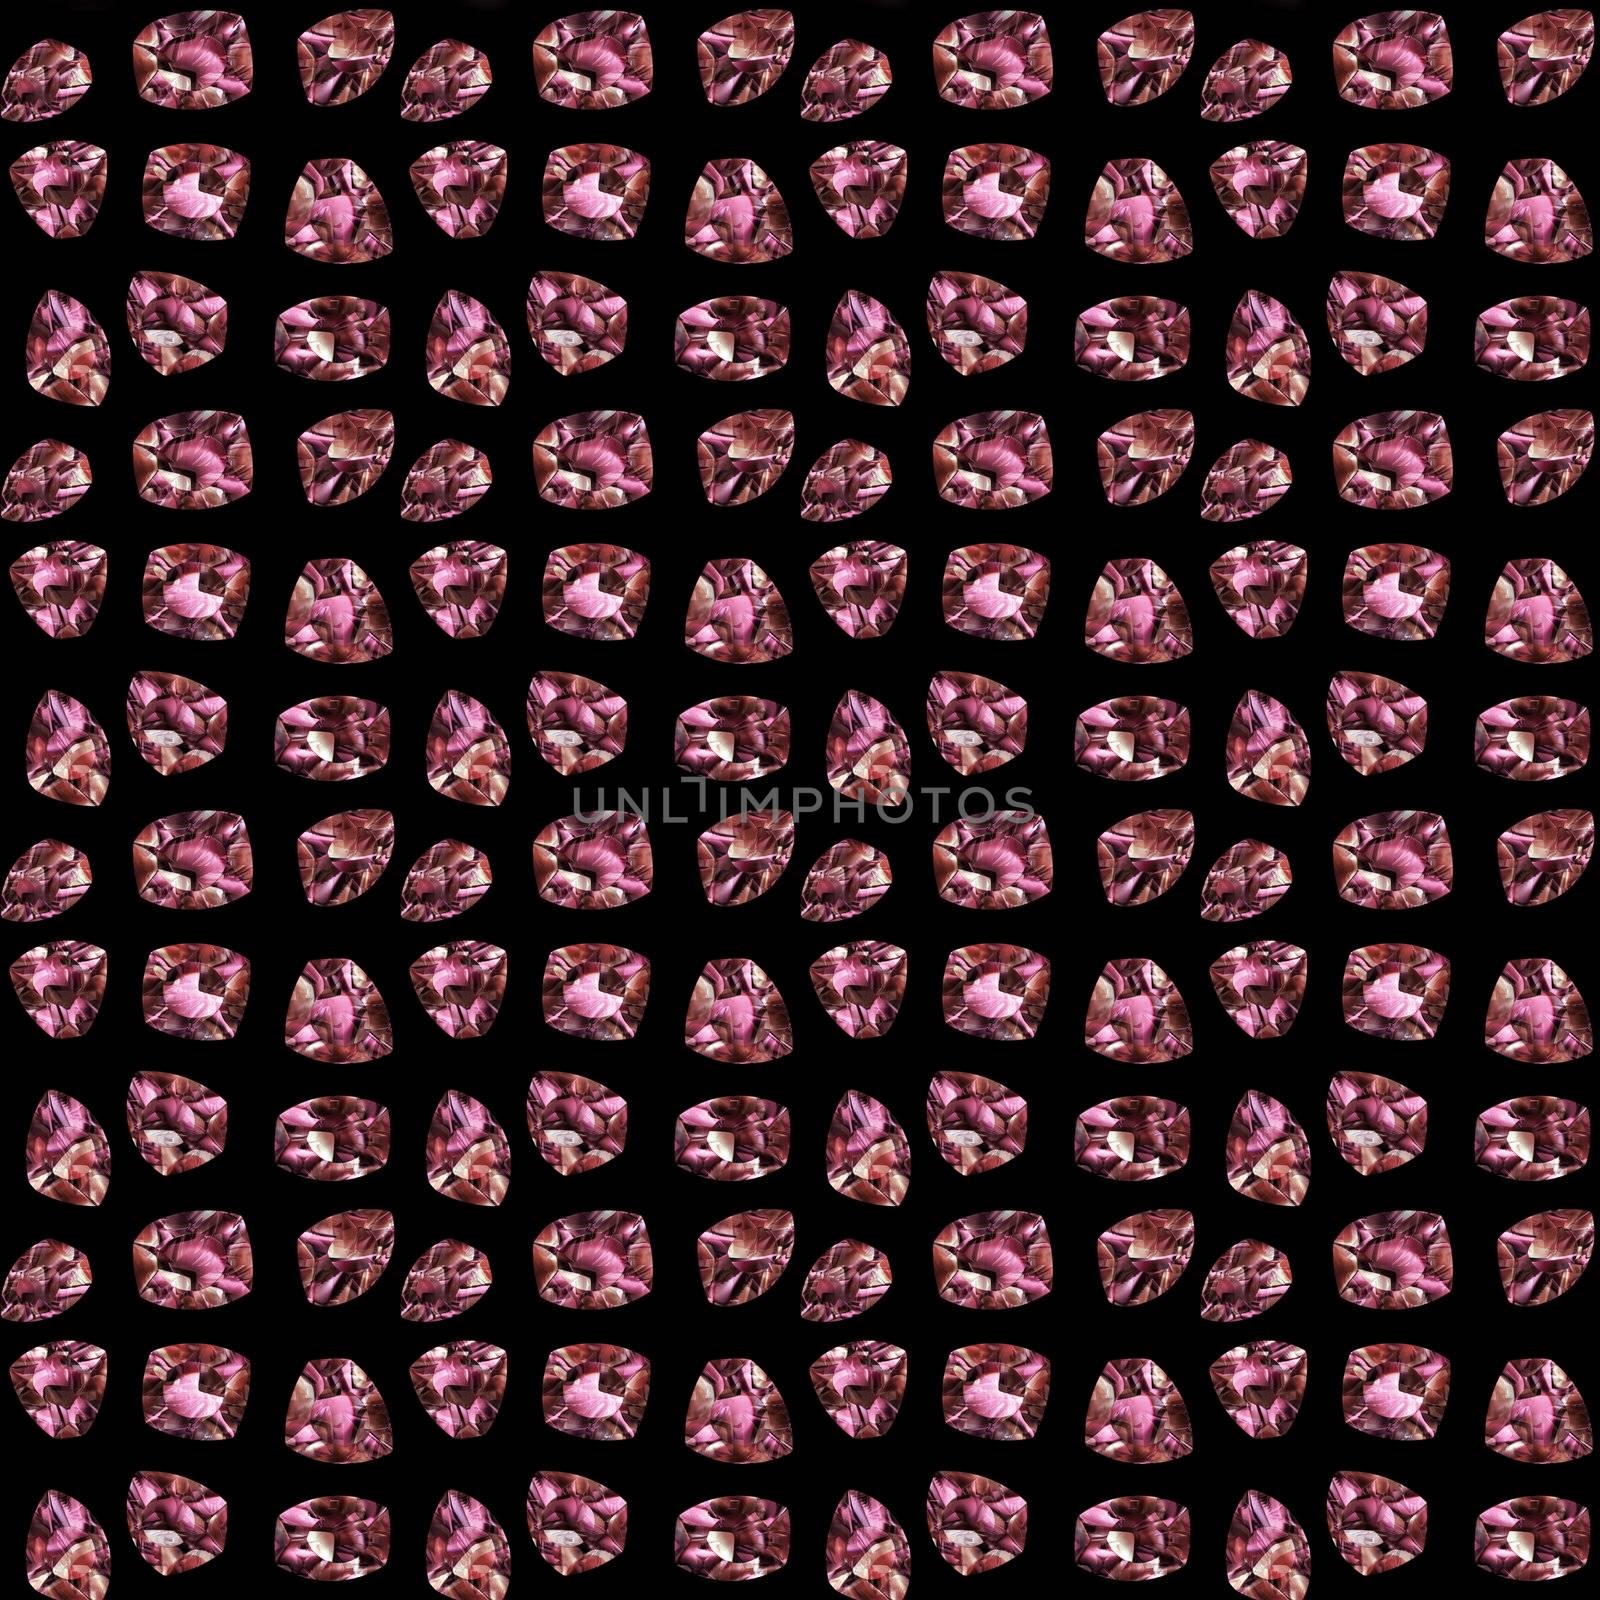 large image of a hoard of ruby gemstones on a black background